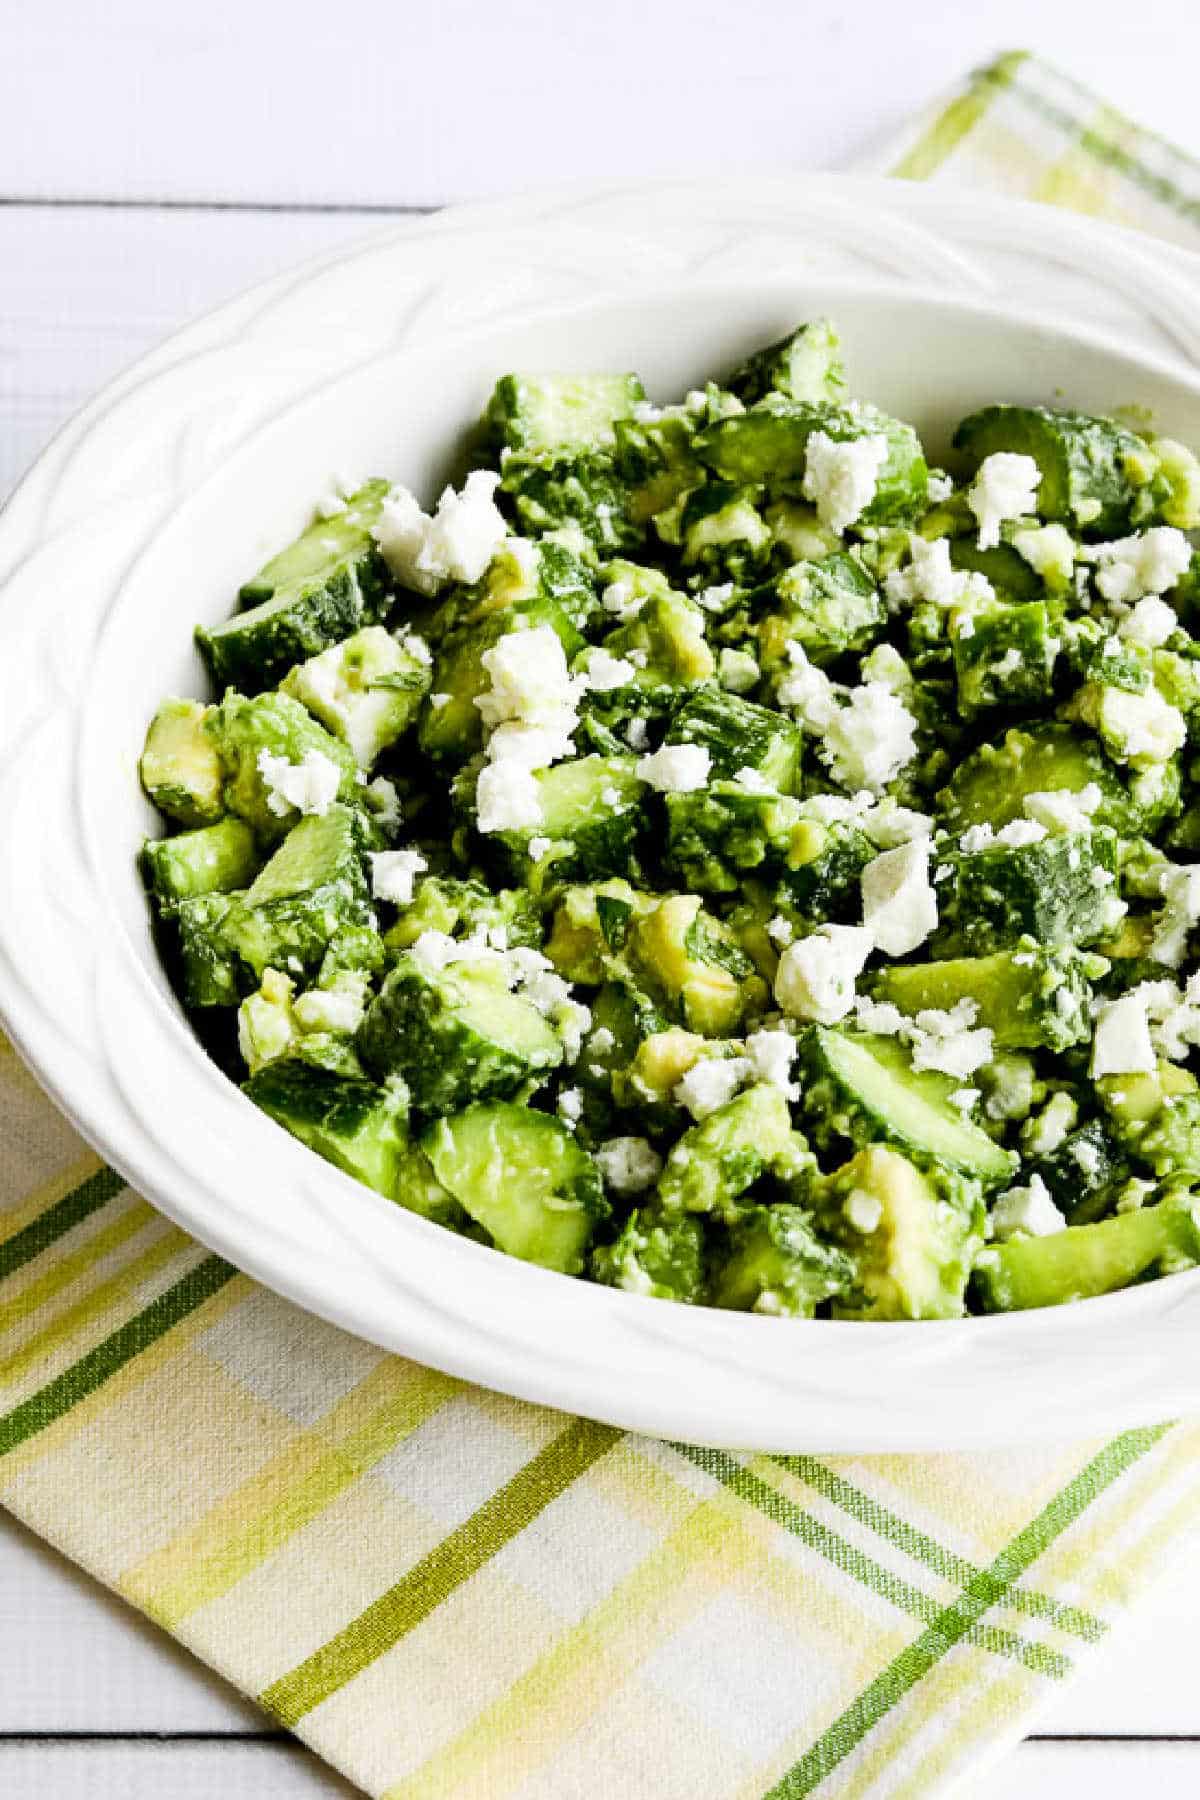 Cucumber salad with avocado and feta shown in a serving bowl